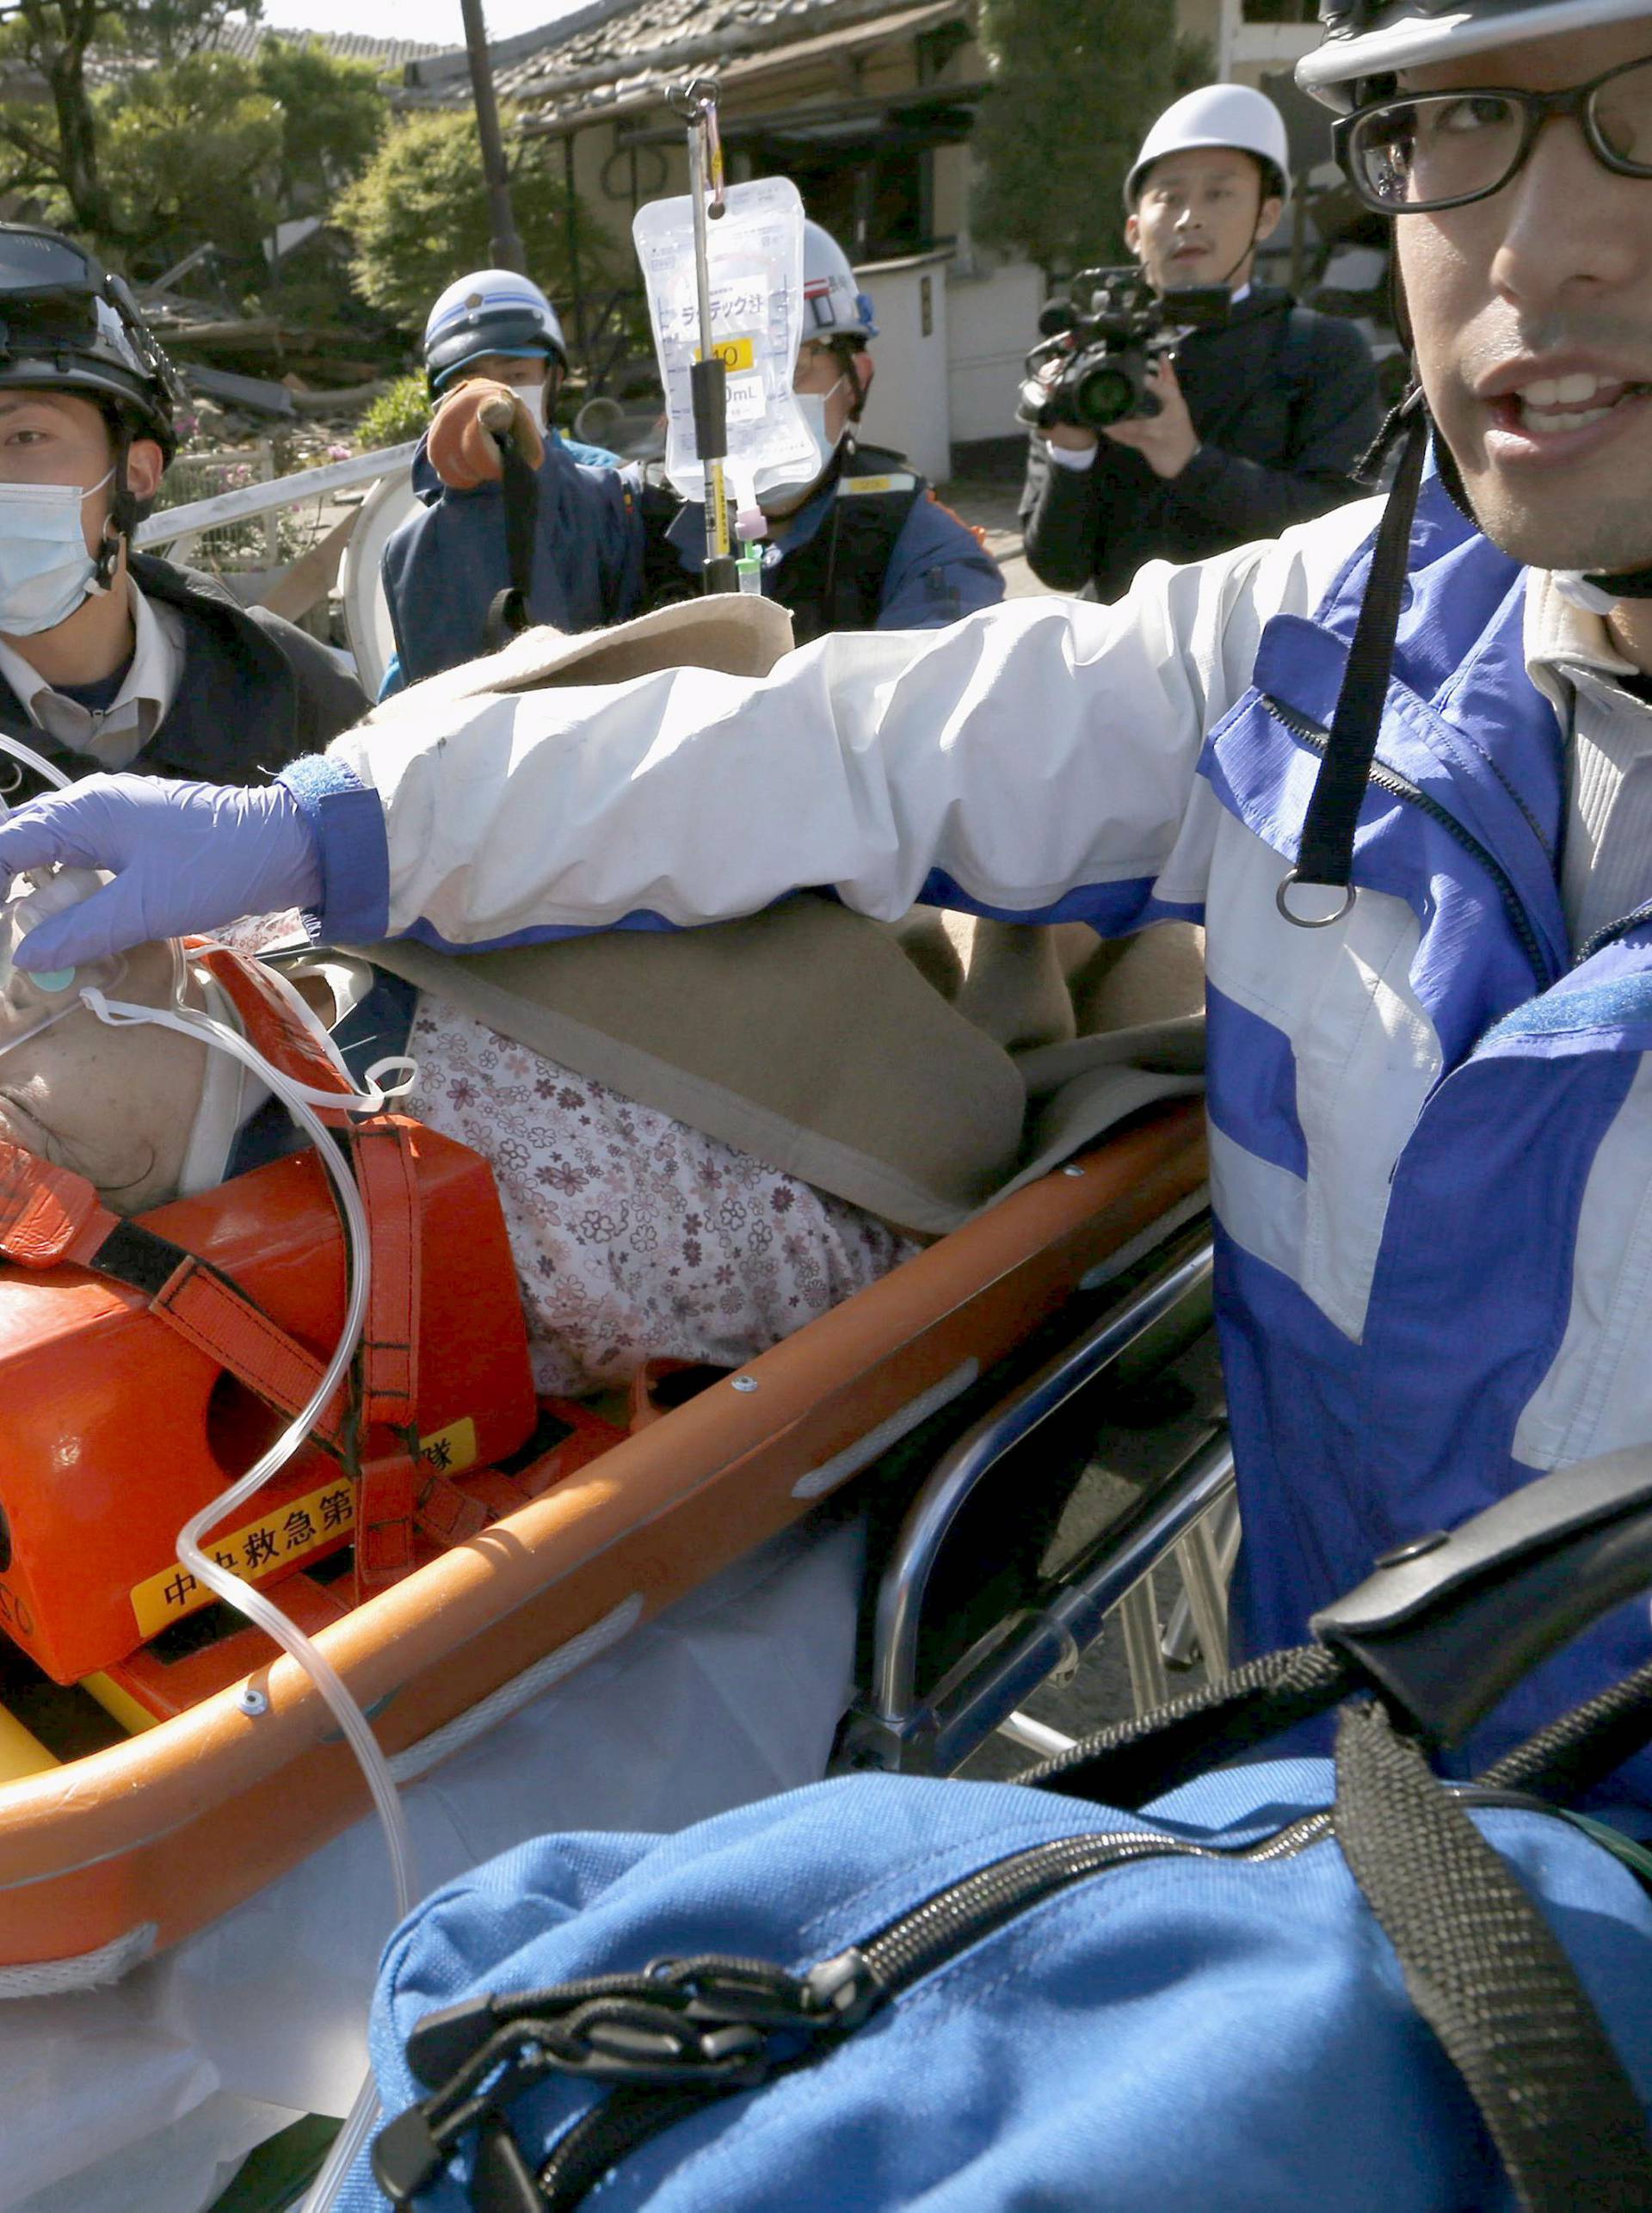 A woman is carried away by rescue workers after being rescued from her collapsed home caused by an earthquake in Mashiki town, Kumamoto prefecture, southern Japan